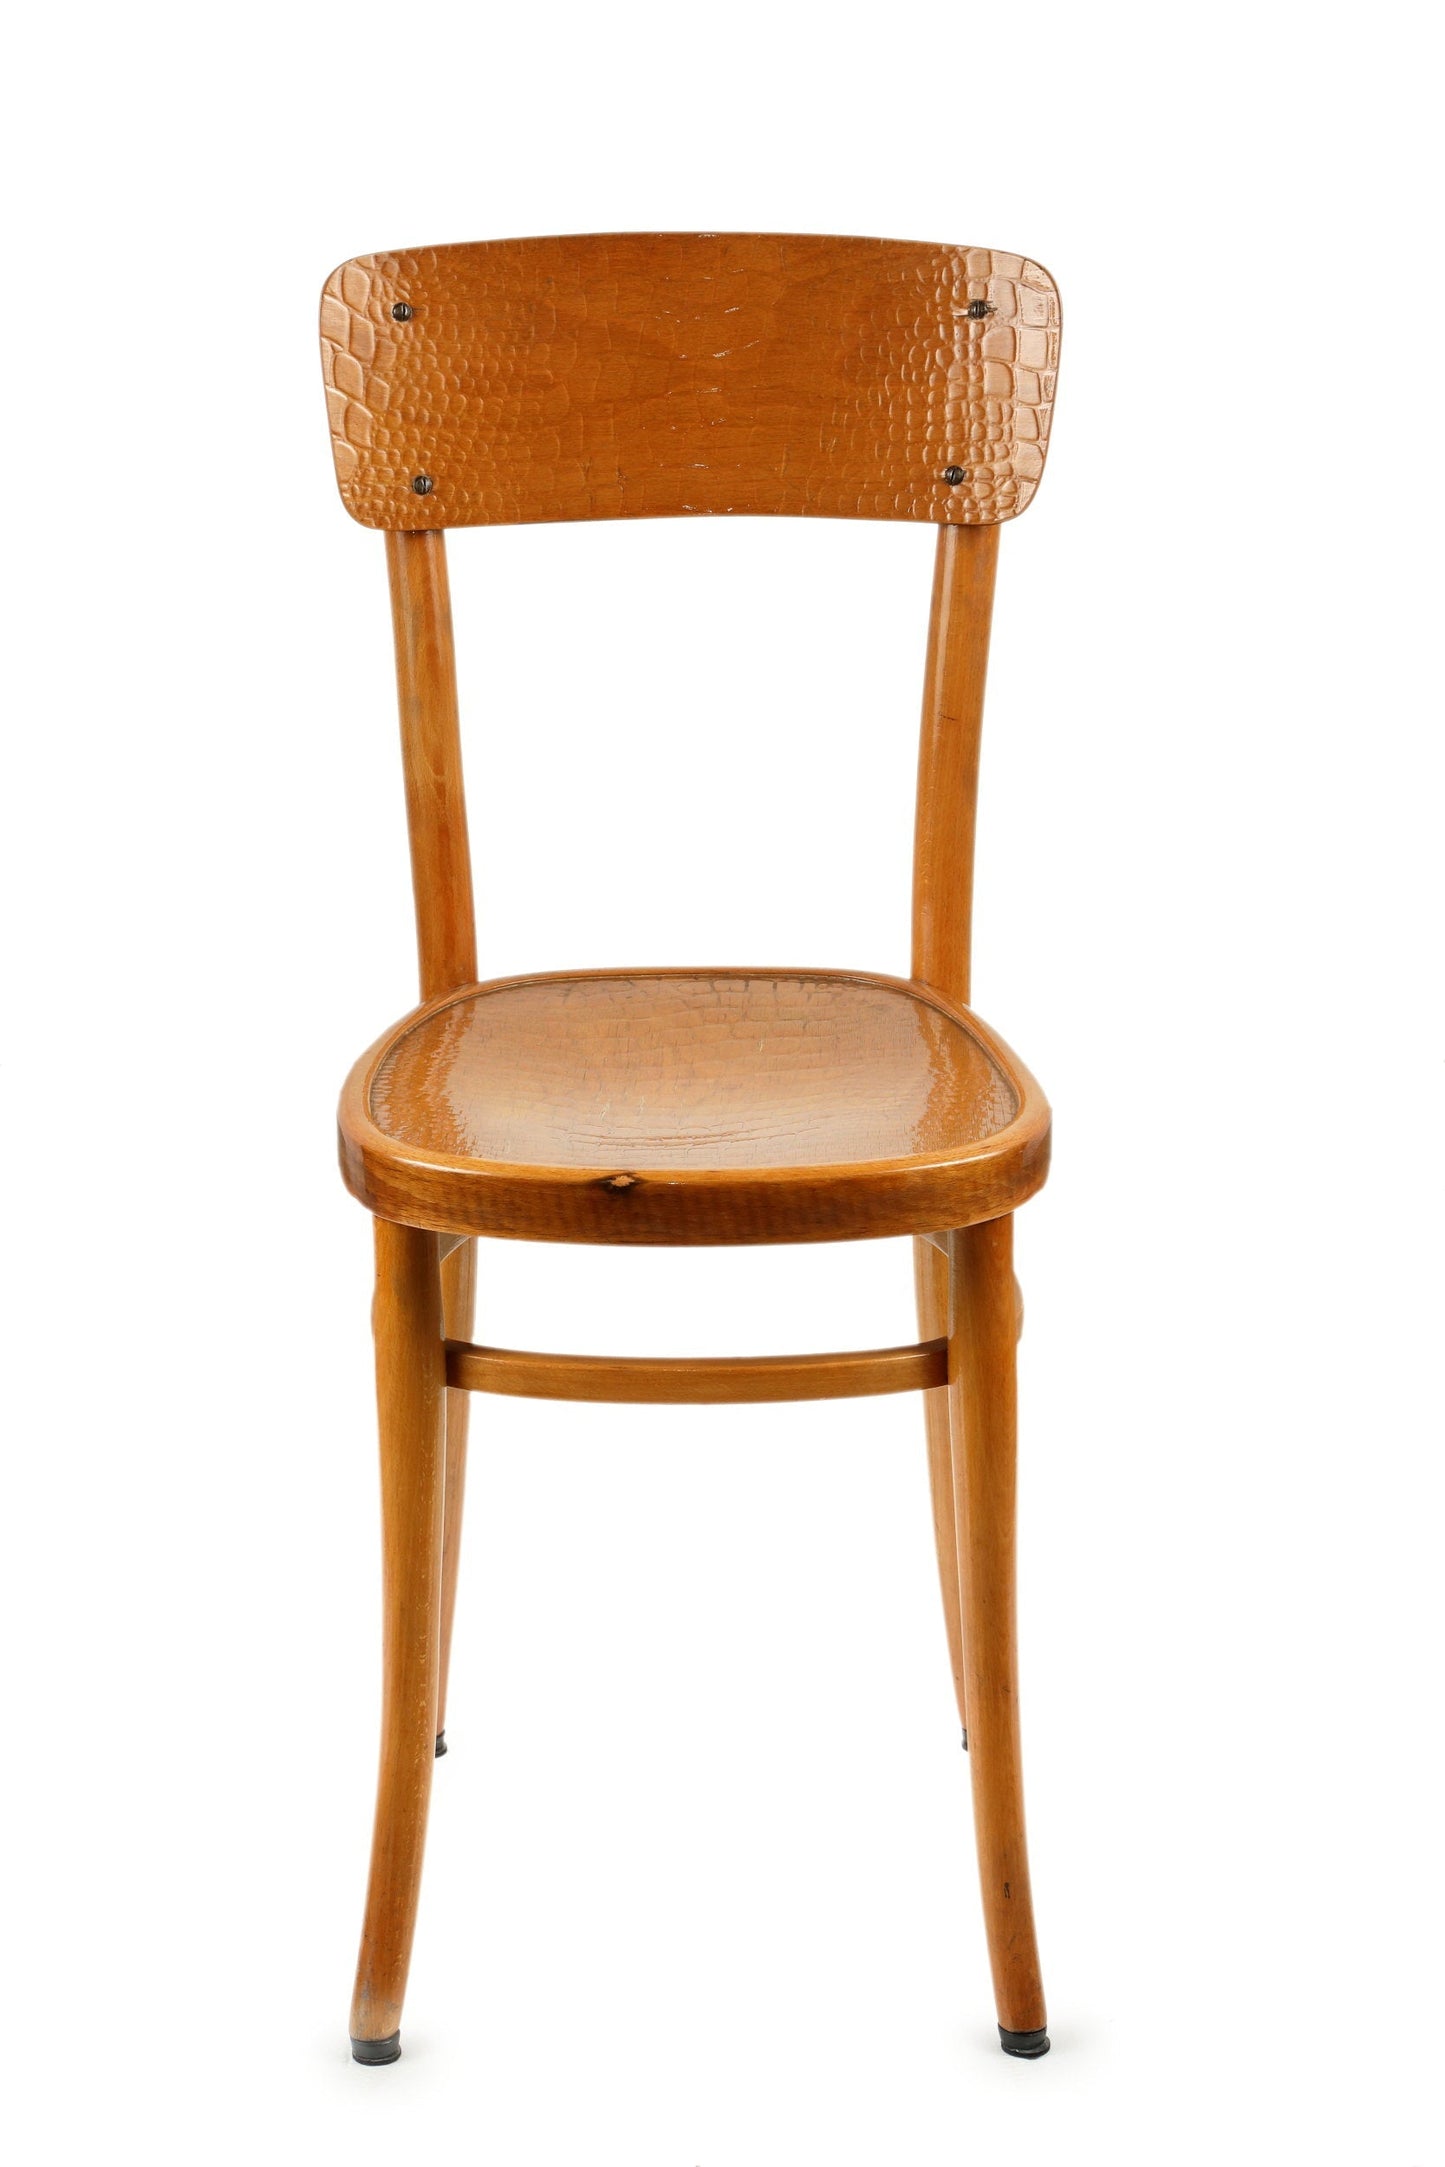 Four Antonio Volpe Udine chairs from the 1940s